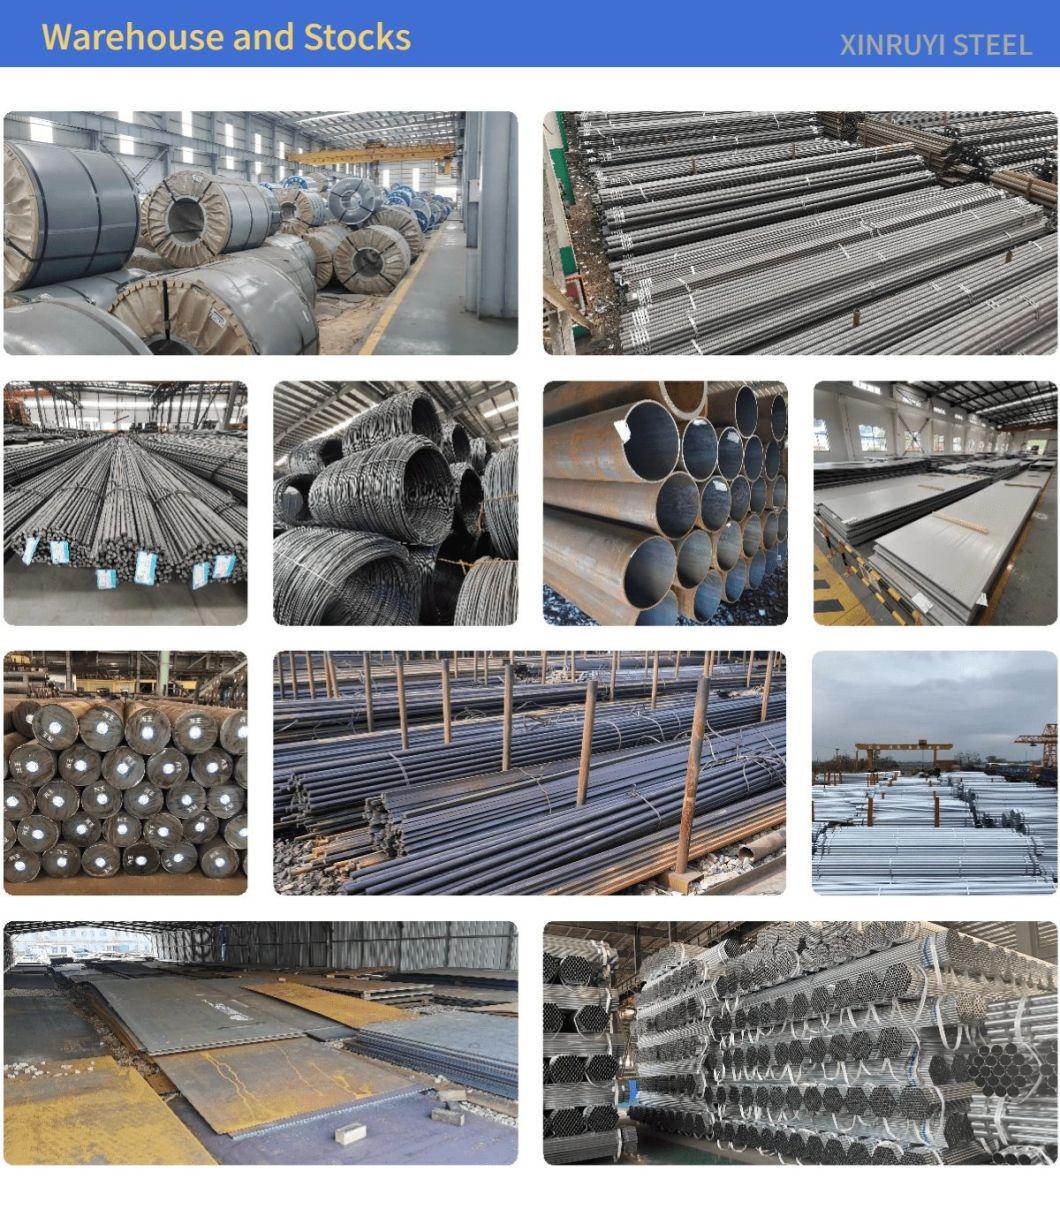 AISI SAE 4130 4140 4145 4145h 4340 42CrMo Forged Machined Turned Alloy API 7 Steel Drill Pipe Stem Rod Hollow Solid Bar Q+T Quenched Normalized and Tempered